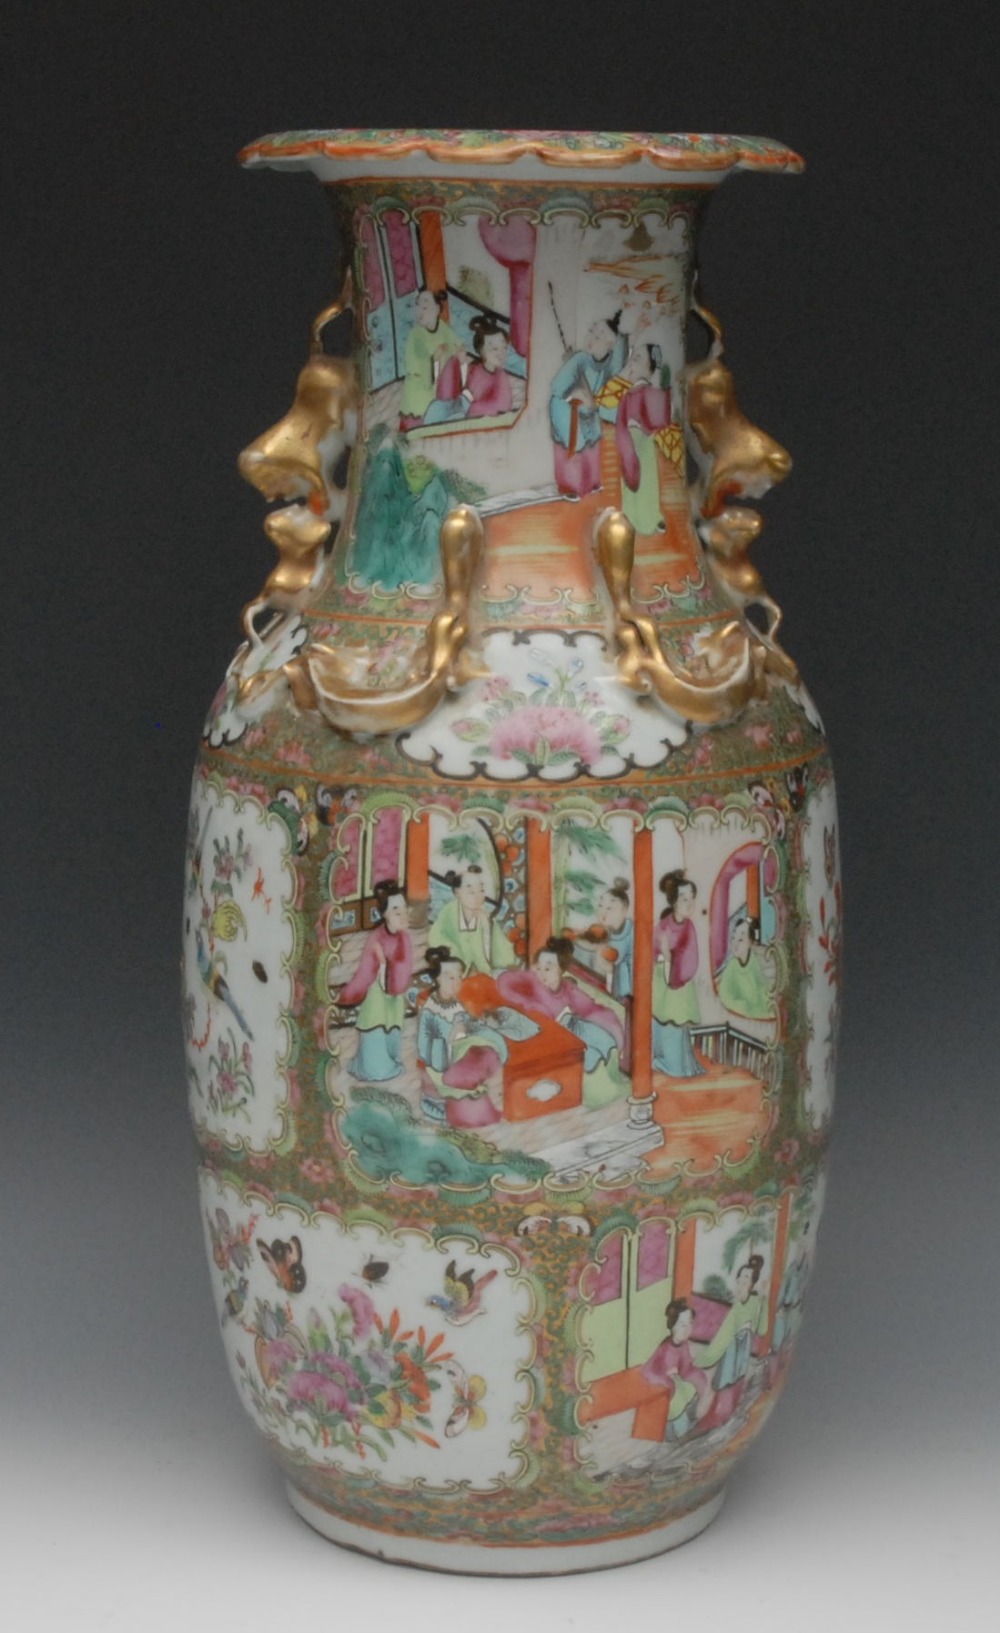 A Cantonese porcelain ovoid vase, painted in the Famille Rose palette with figures, officials and